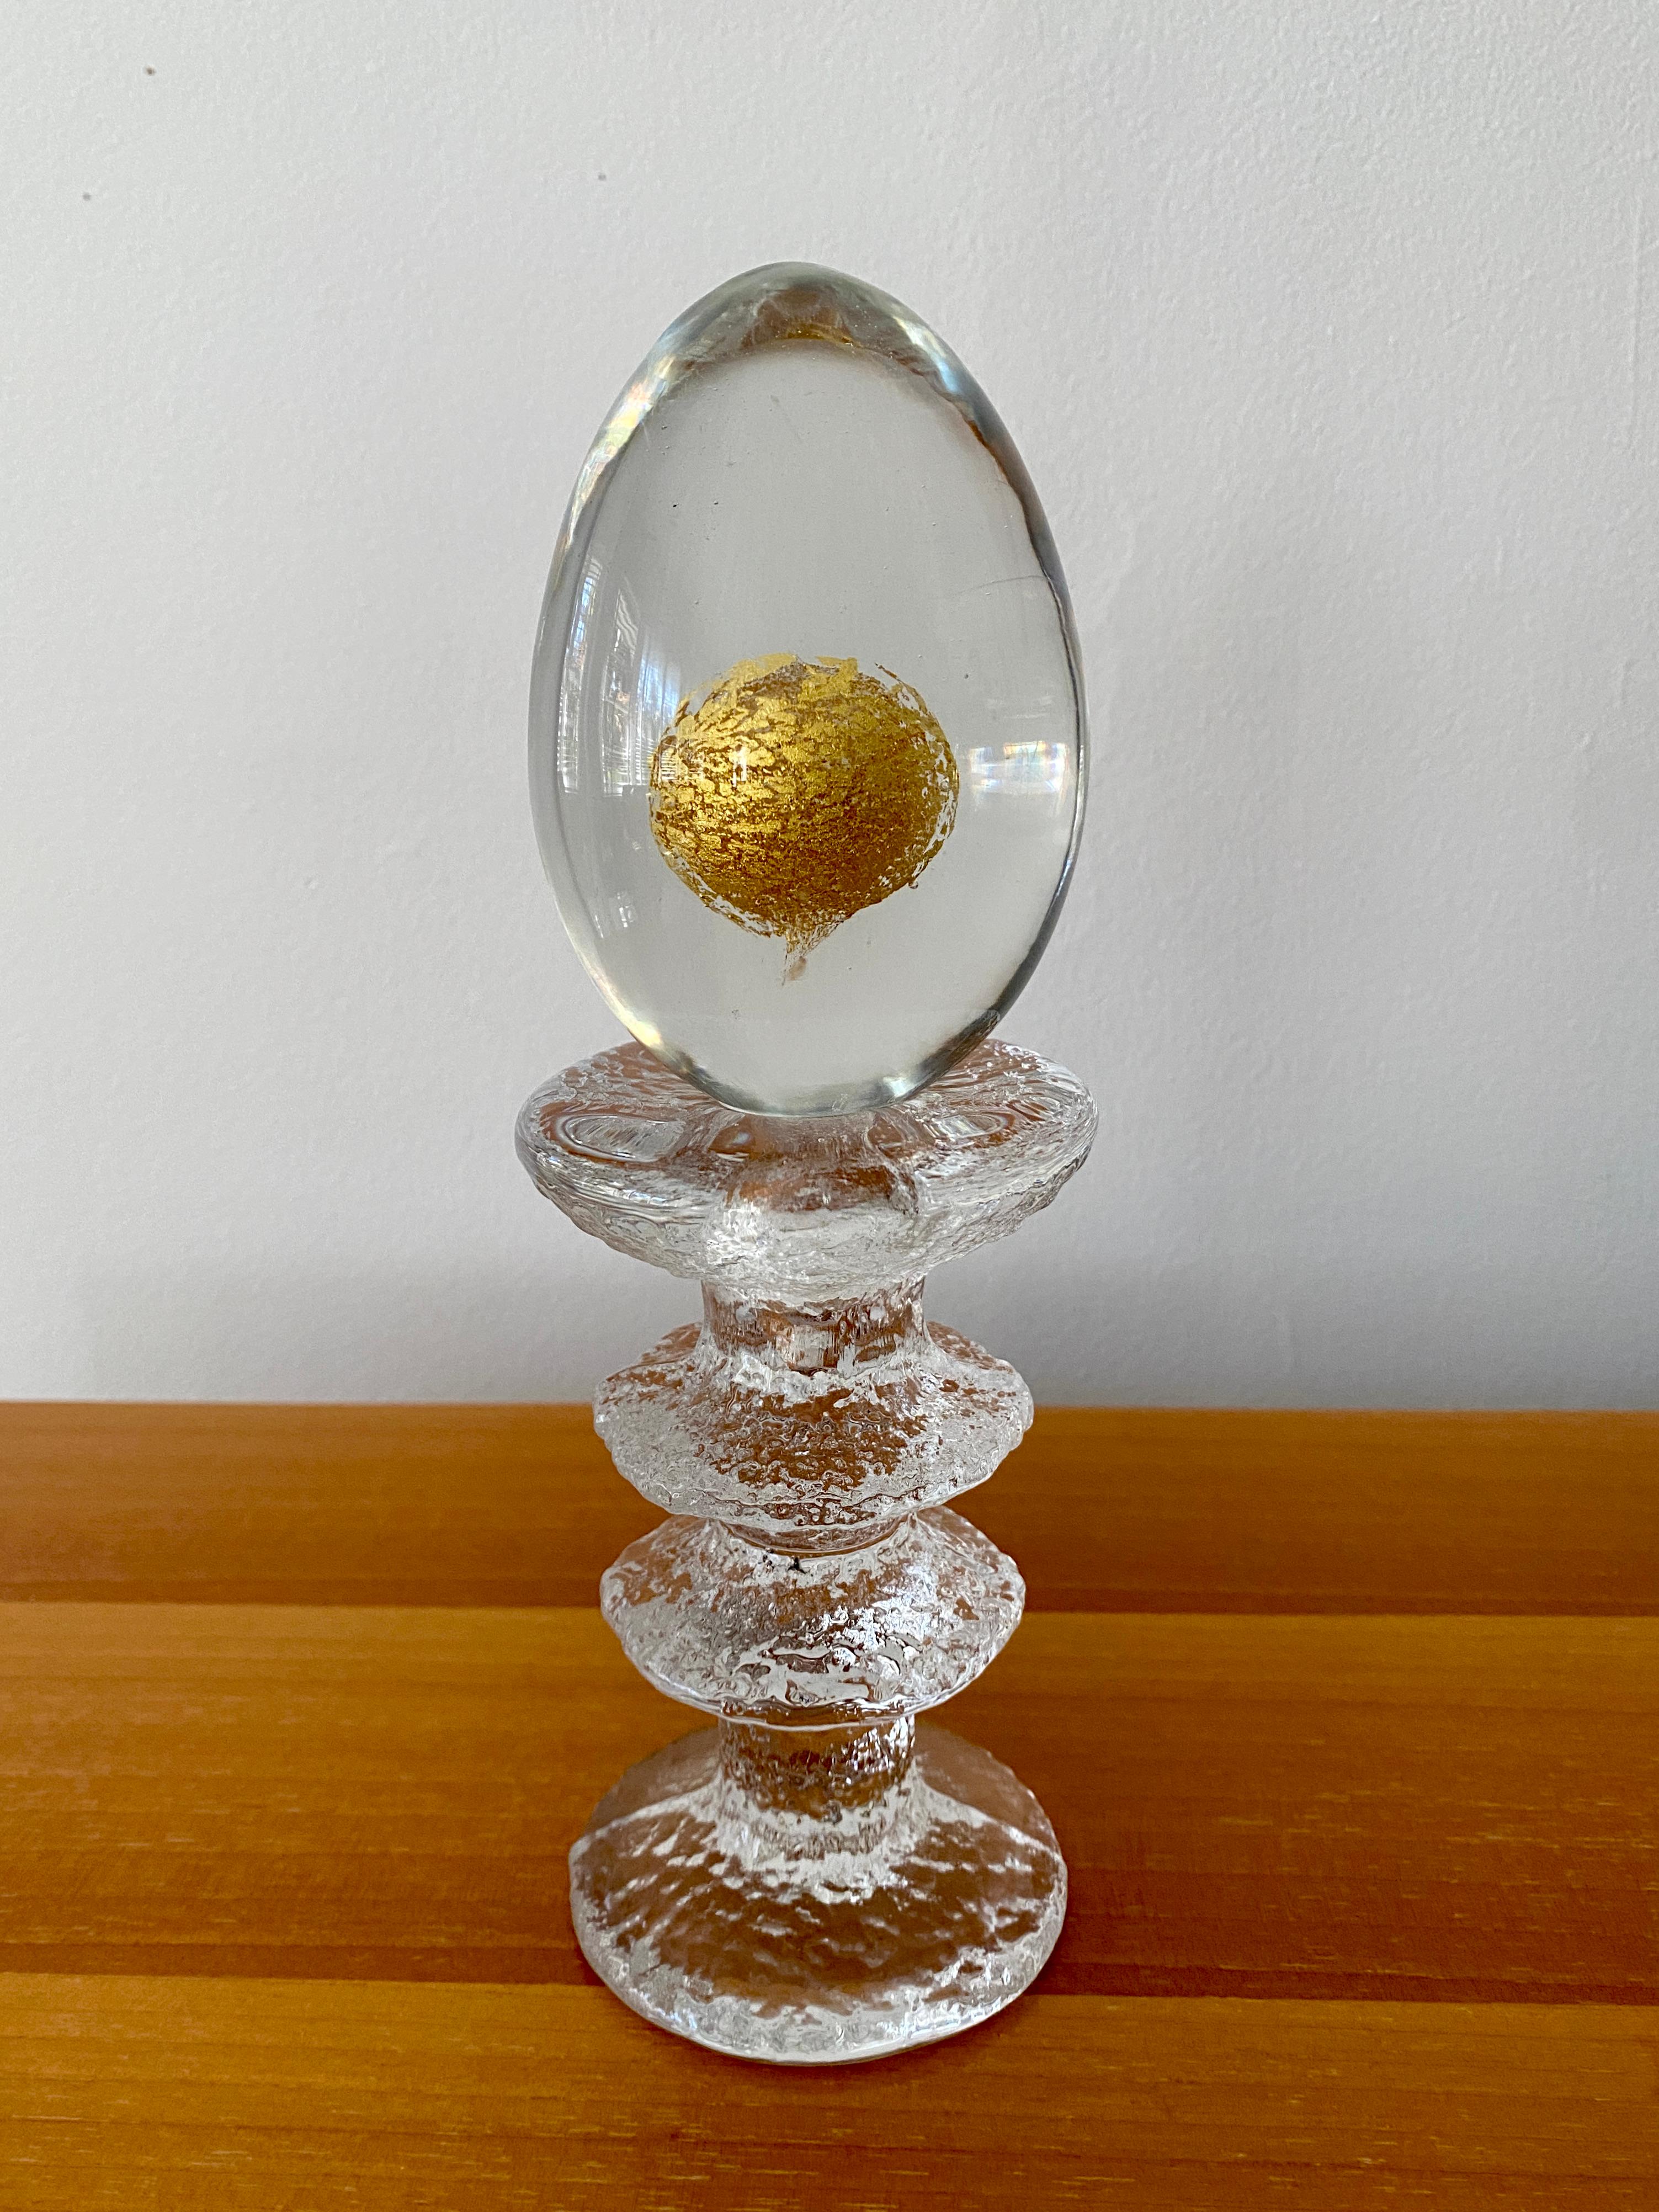 A vintage transparent glass egg with a gold leaf yoke. Tapio Wirkkala was well know by Venini since the 1950s due to Wirkkala's inclusion in the Venice Biennale's, Wirkkala joined Venini in 1964, the egg was designed in 1968 and manufactured until